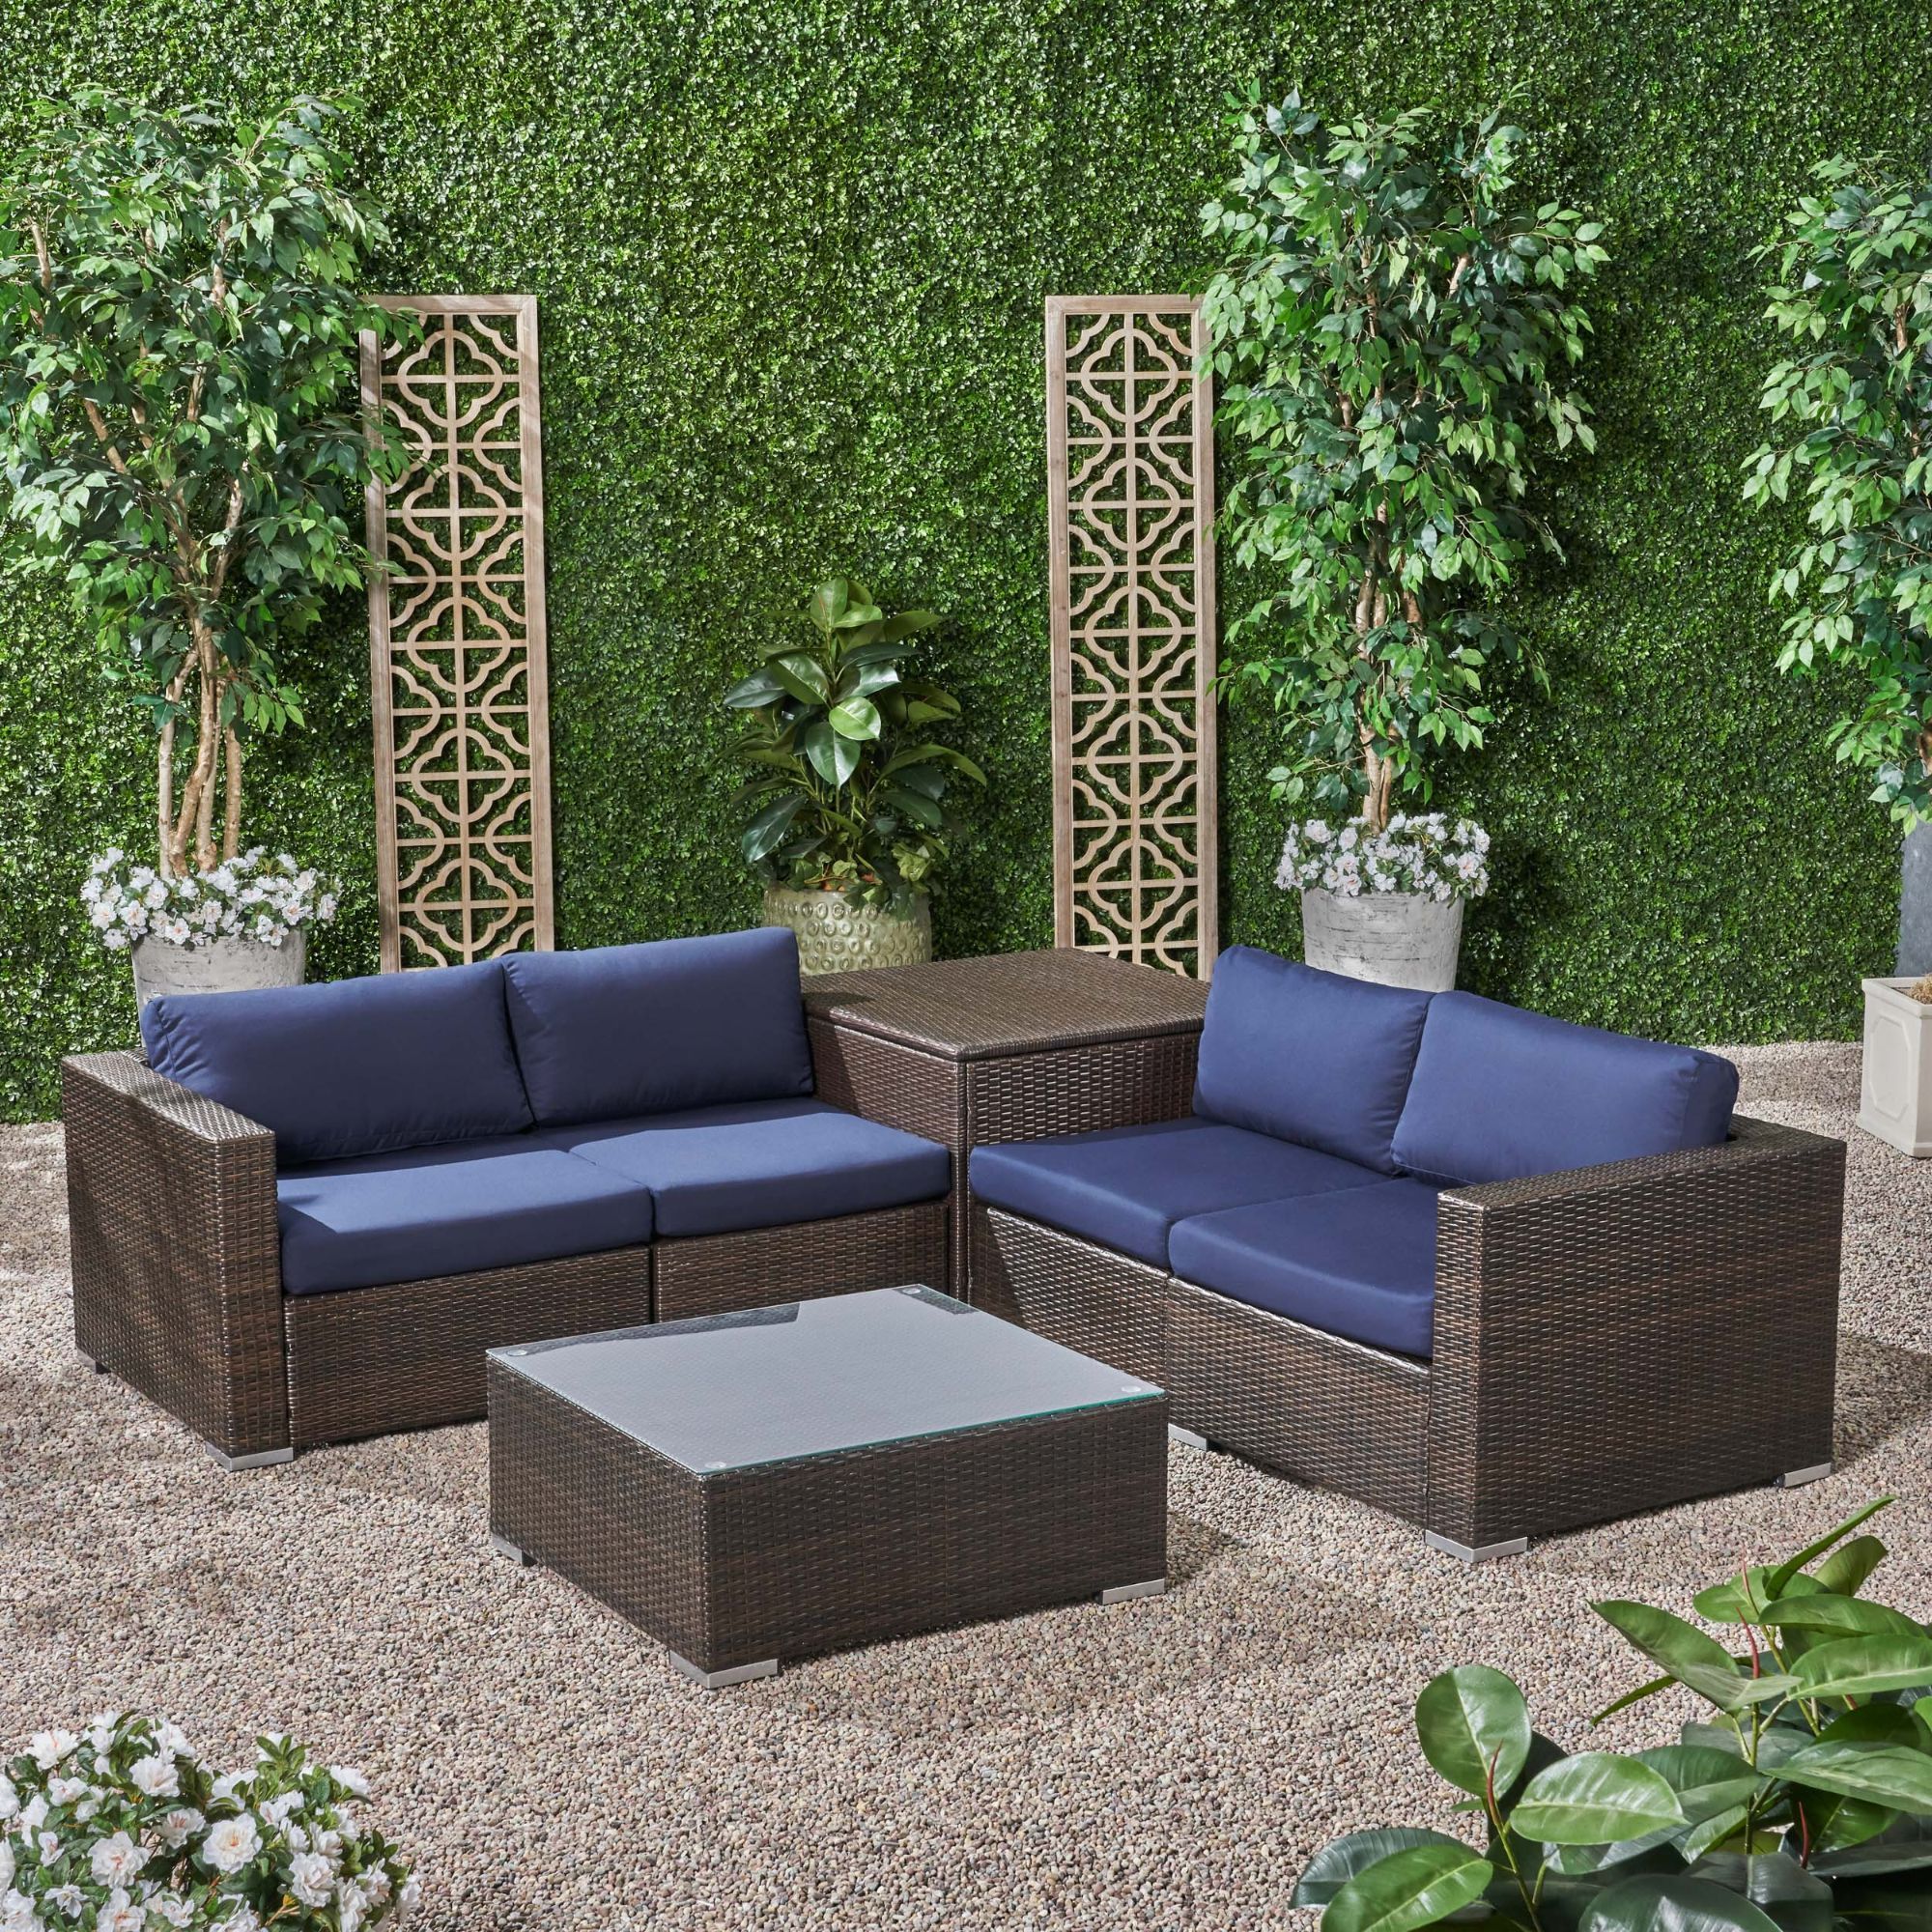 6 Piece Brown Wicker Finish Outdoor Furniture Patio Conversation Set Pertaining To Navy Outdoor Seating Sectional Patio Sets (View 3 of 15)